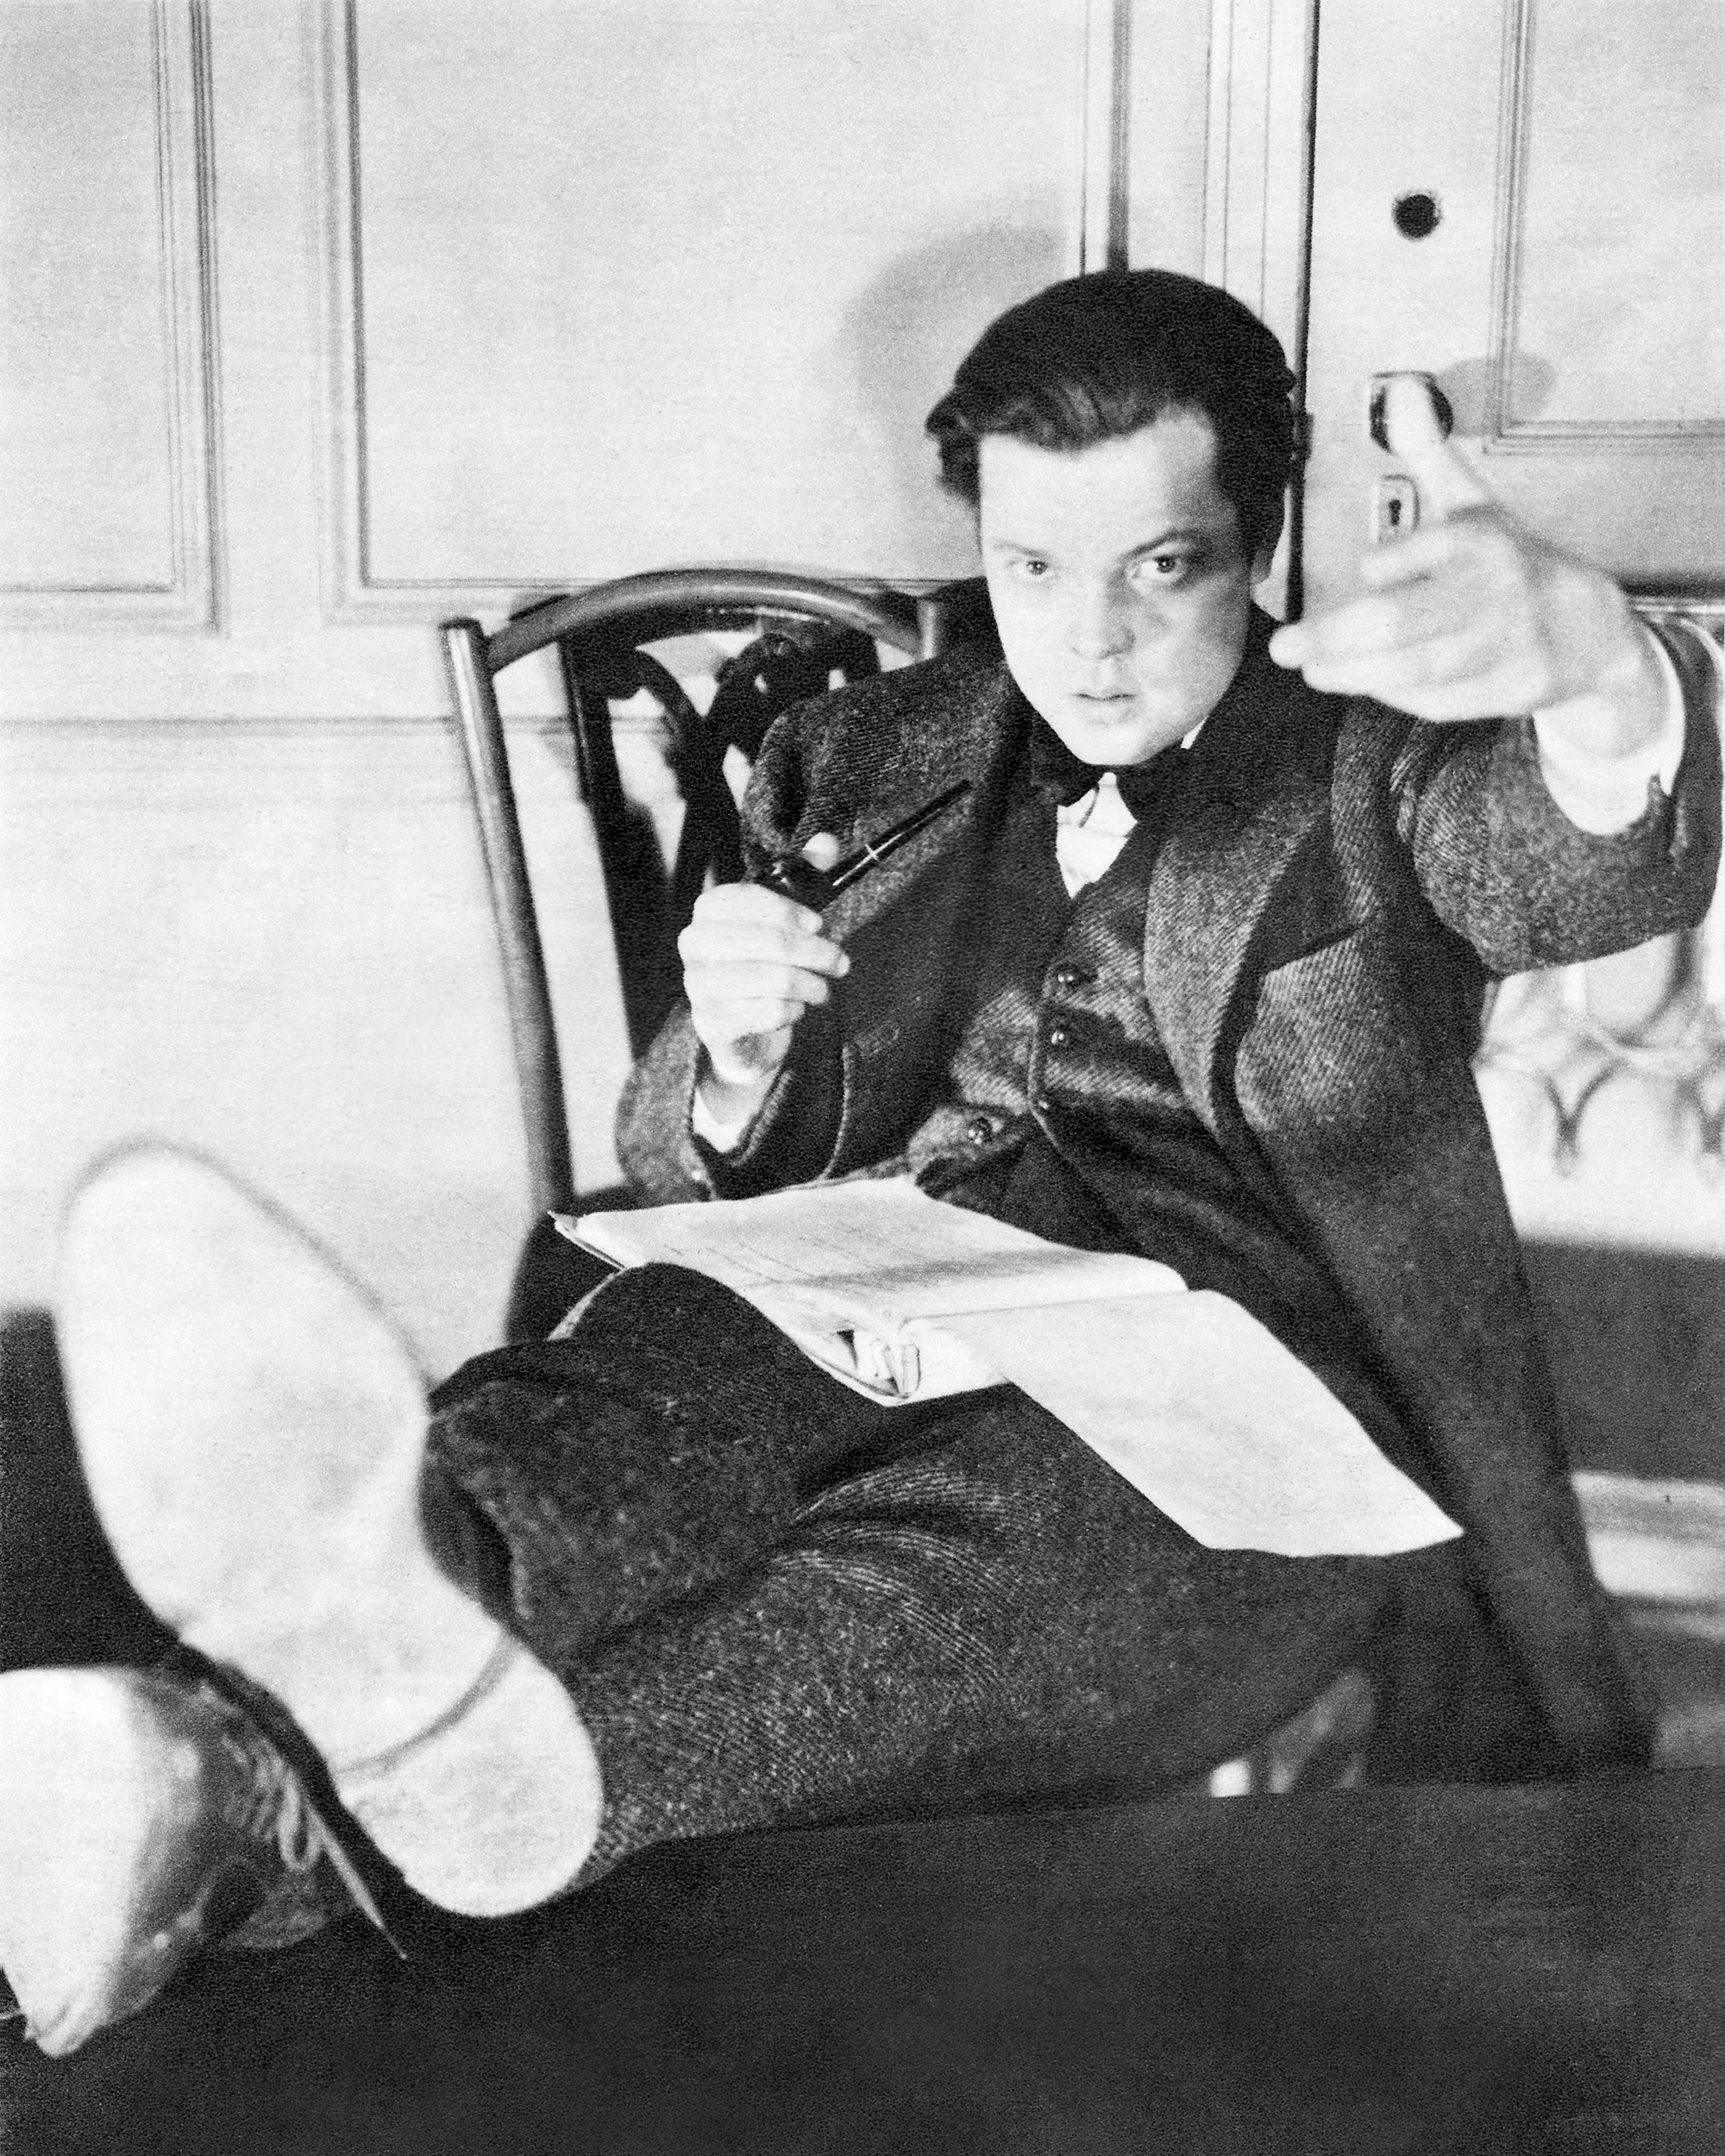 Well before Citizen Kane, Orson Welles appeared in the "America's Most Interesting People" section of The American Magazine for his prowess on the stage. 